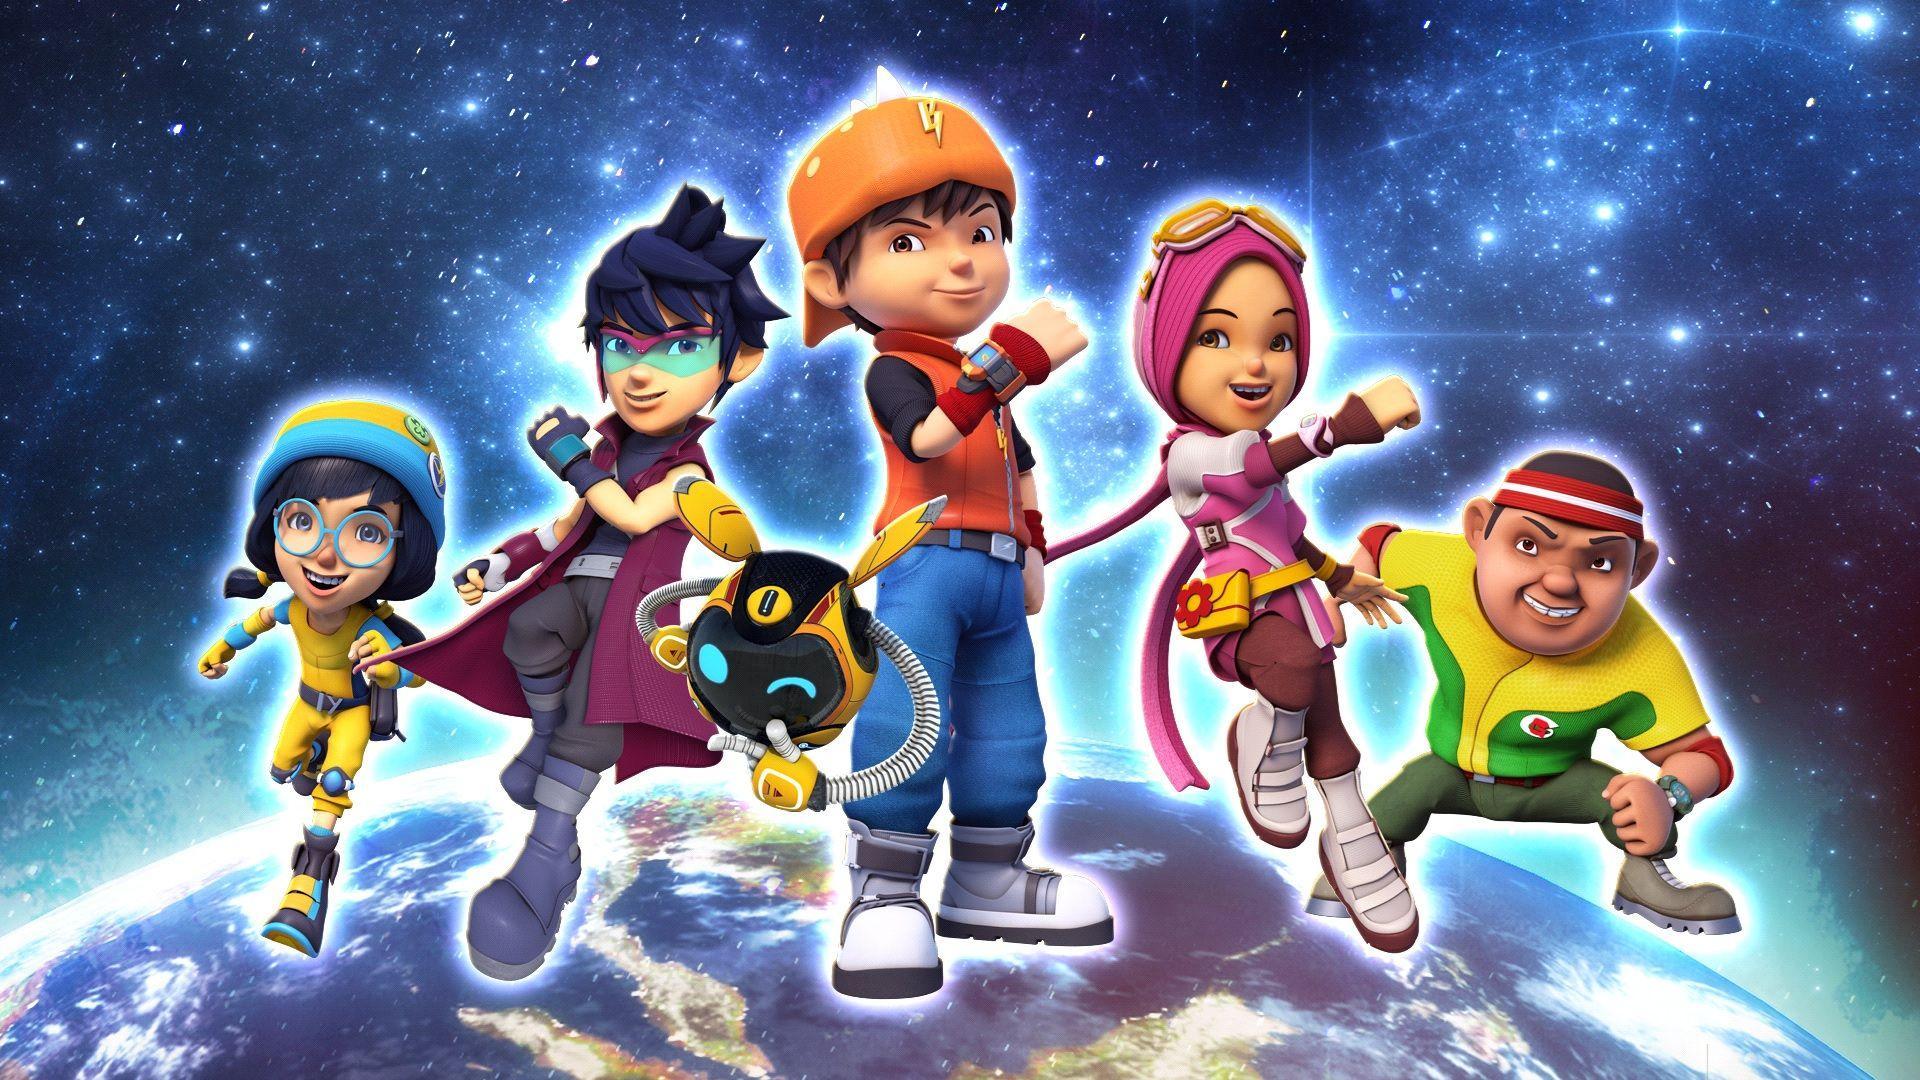  Boboiboy  HD  Wallpaper  for Android APK Download